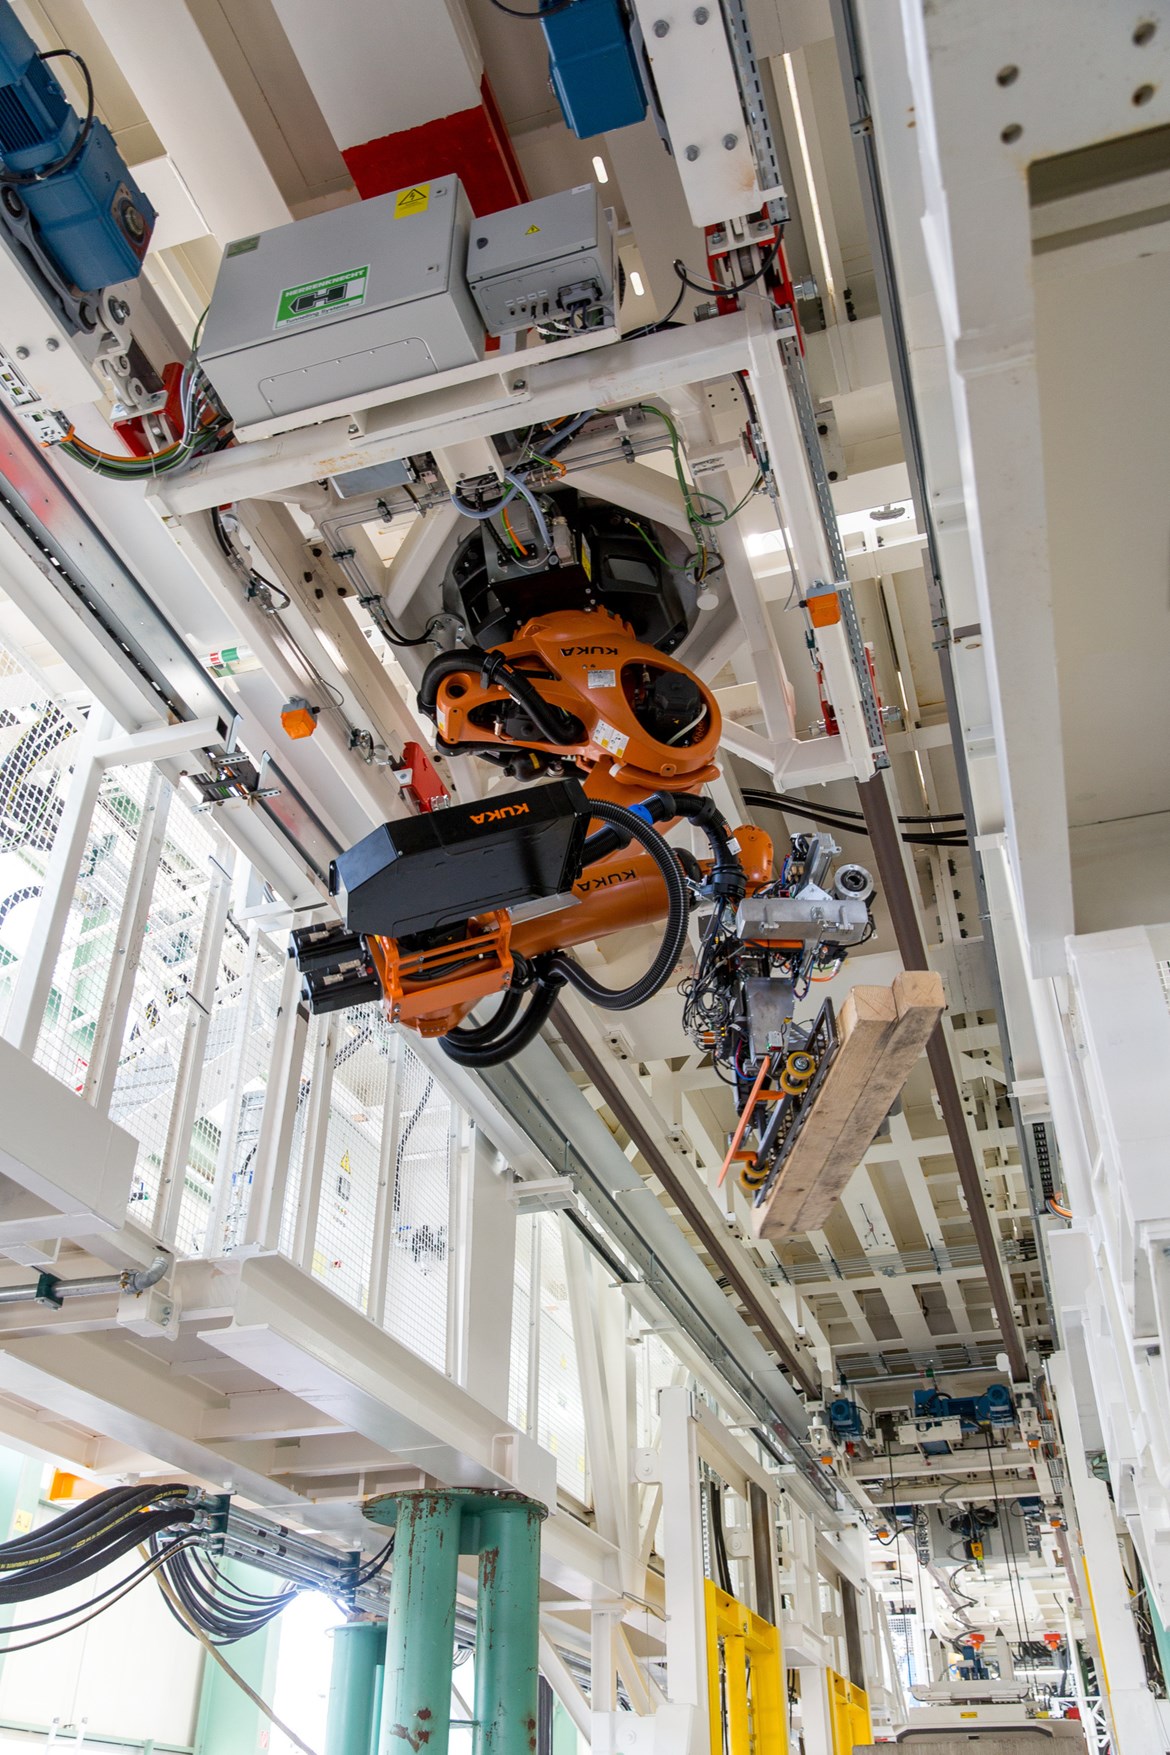 HS2 boosts safety and efficiency with innovative robot for Chiltern tunnelling machines: Krokodyl  robot onboard HS2's TBMs November 2020